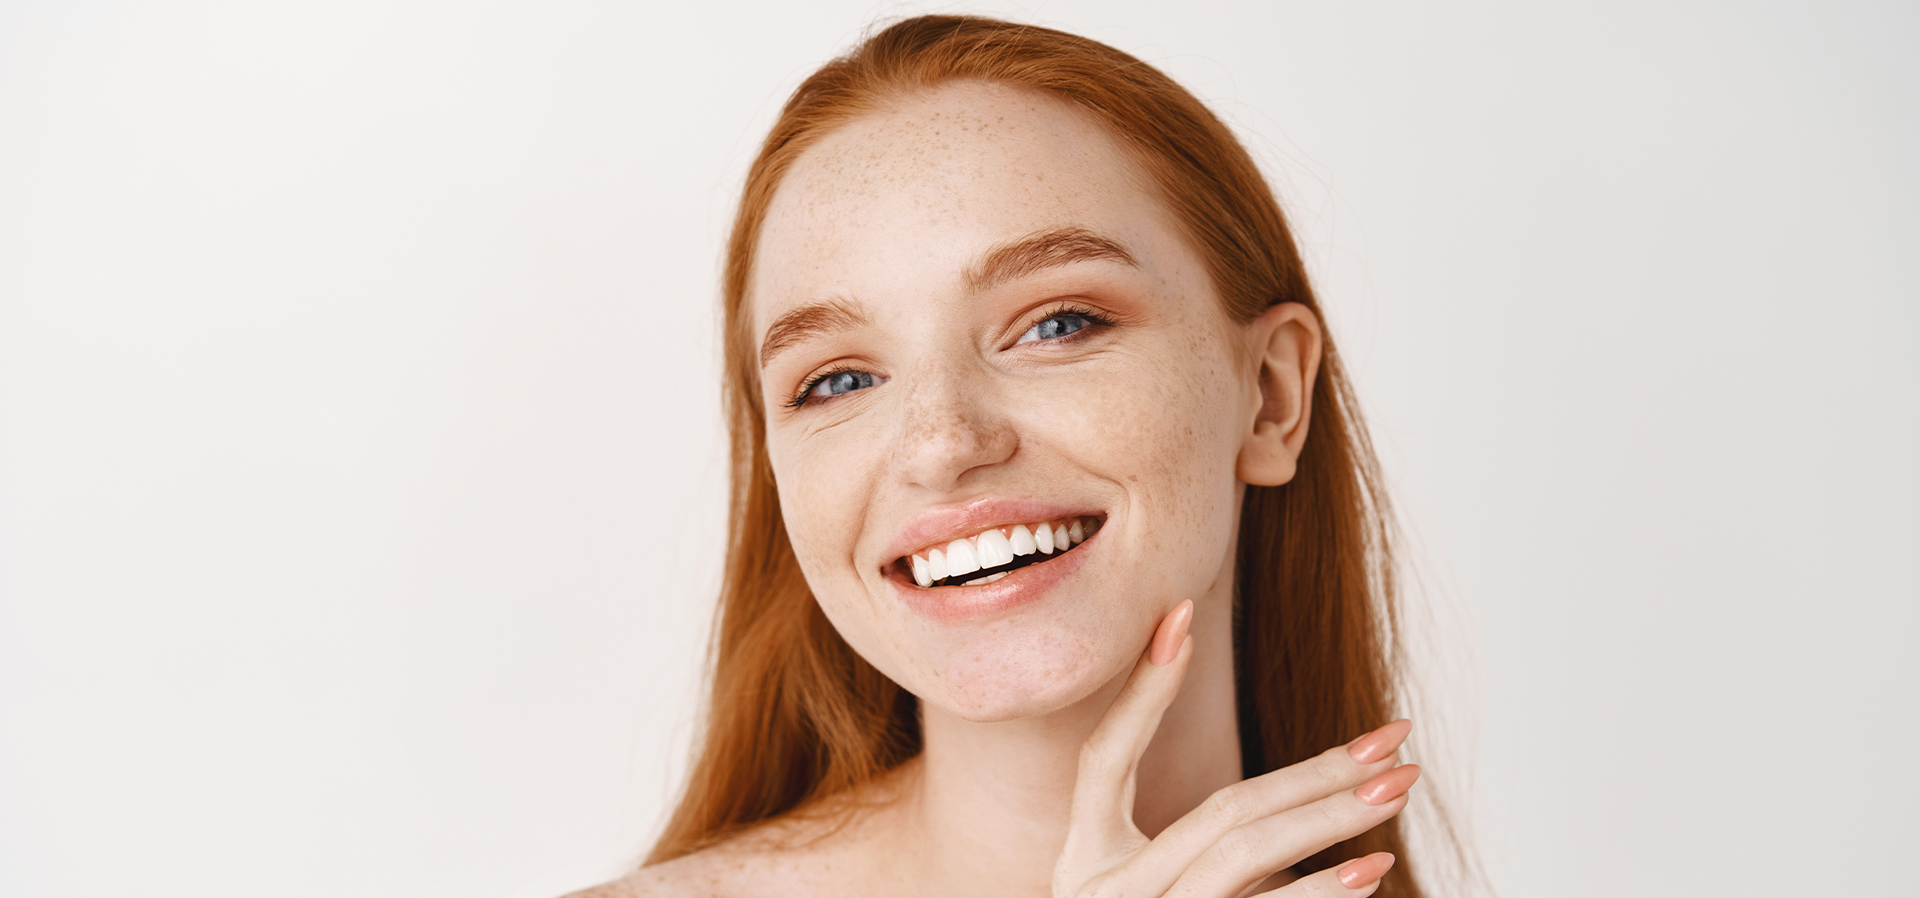 Photo of a red-headed woman with great skin